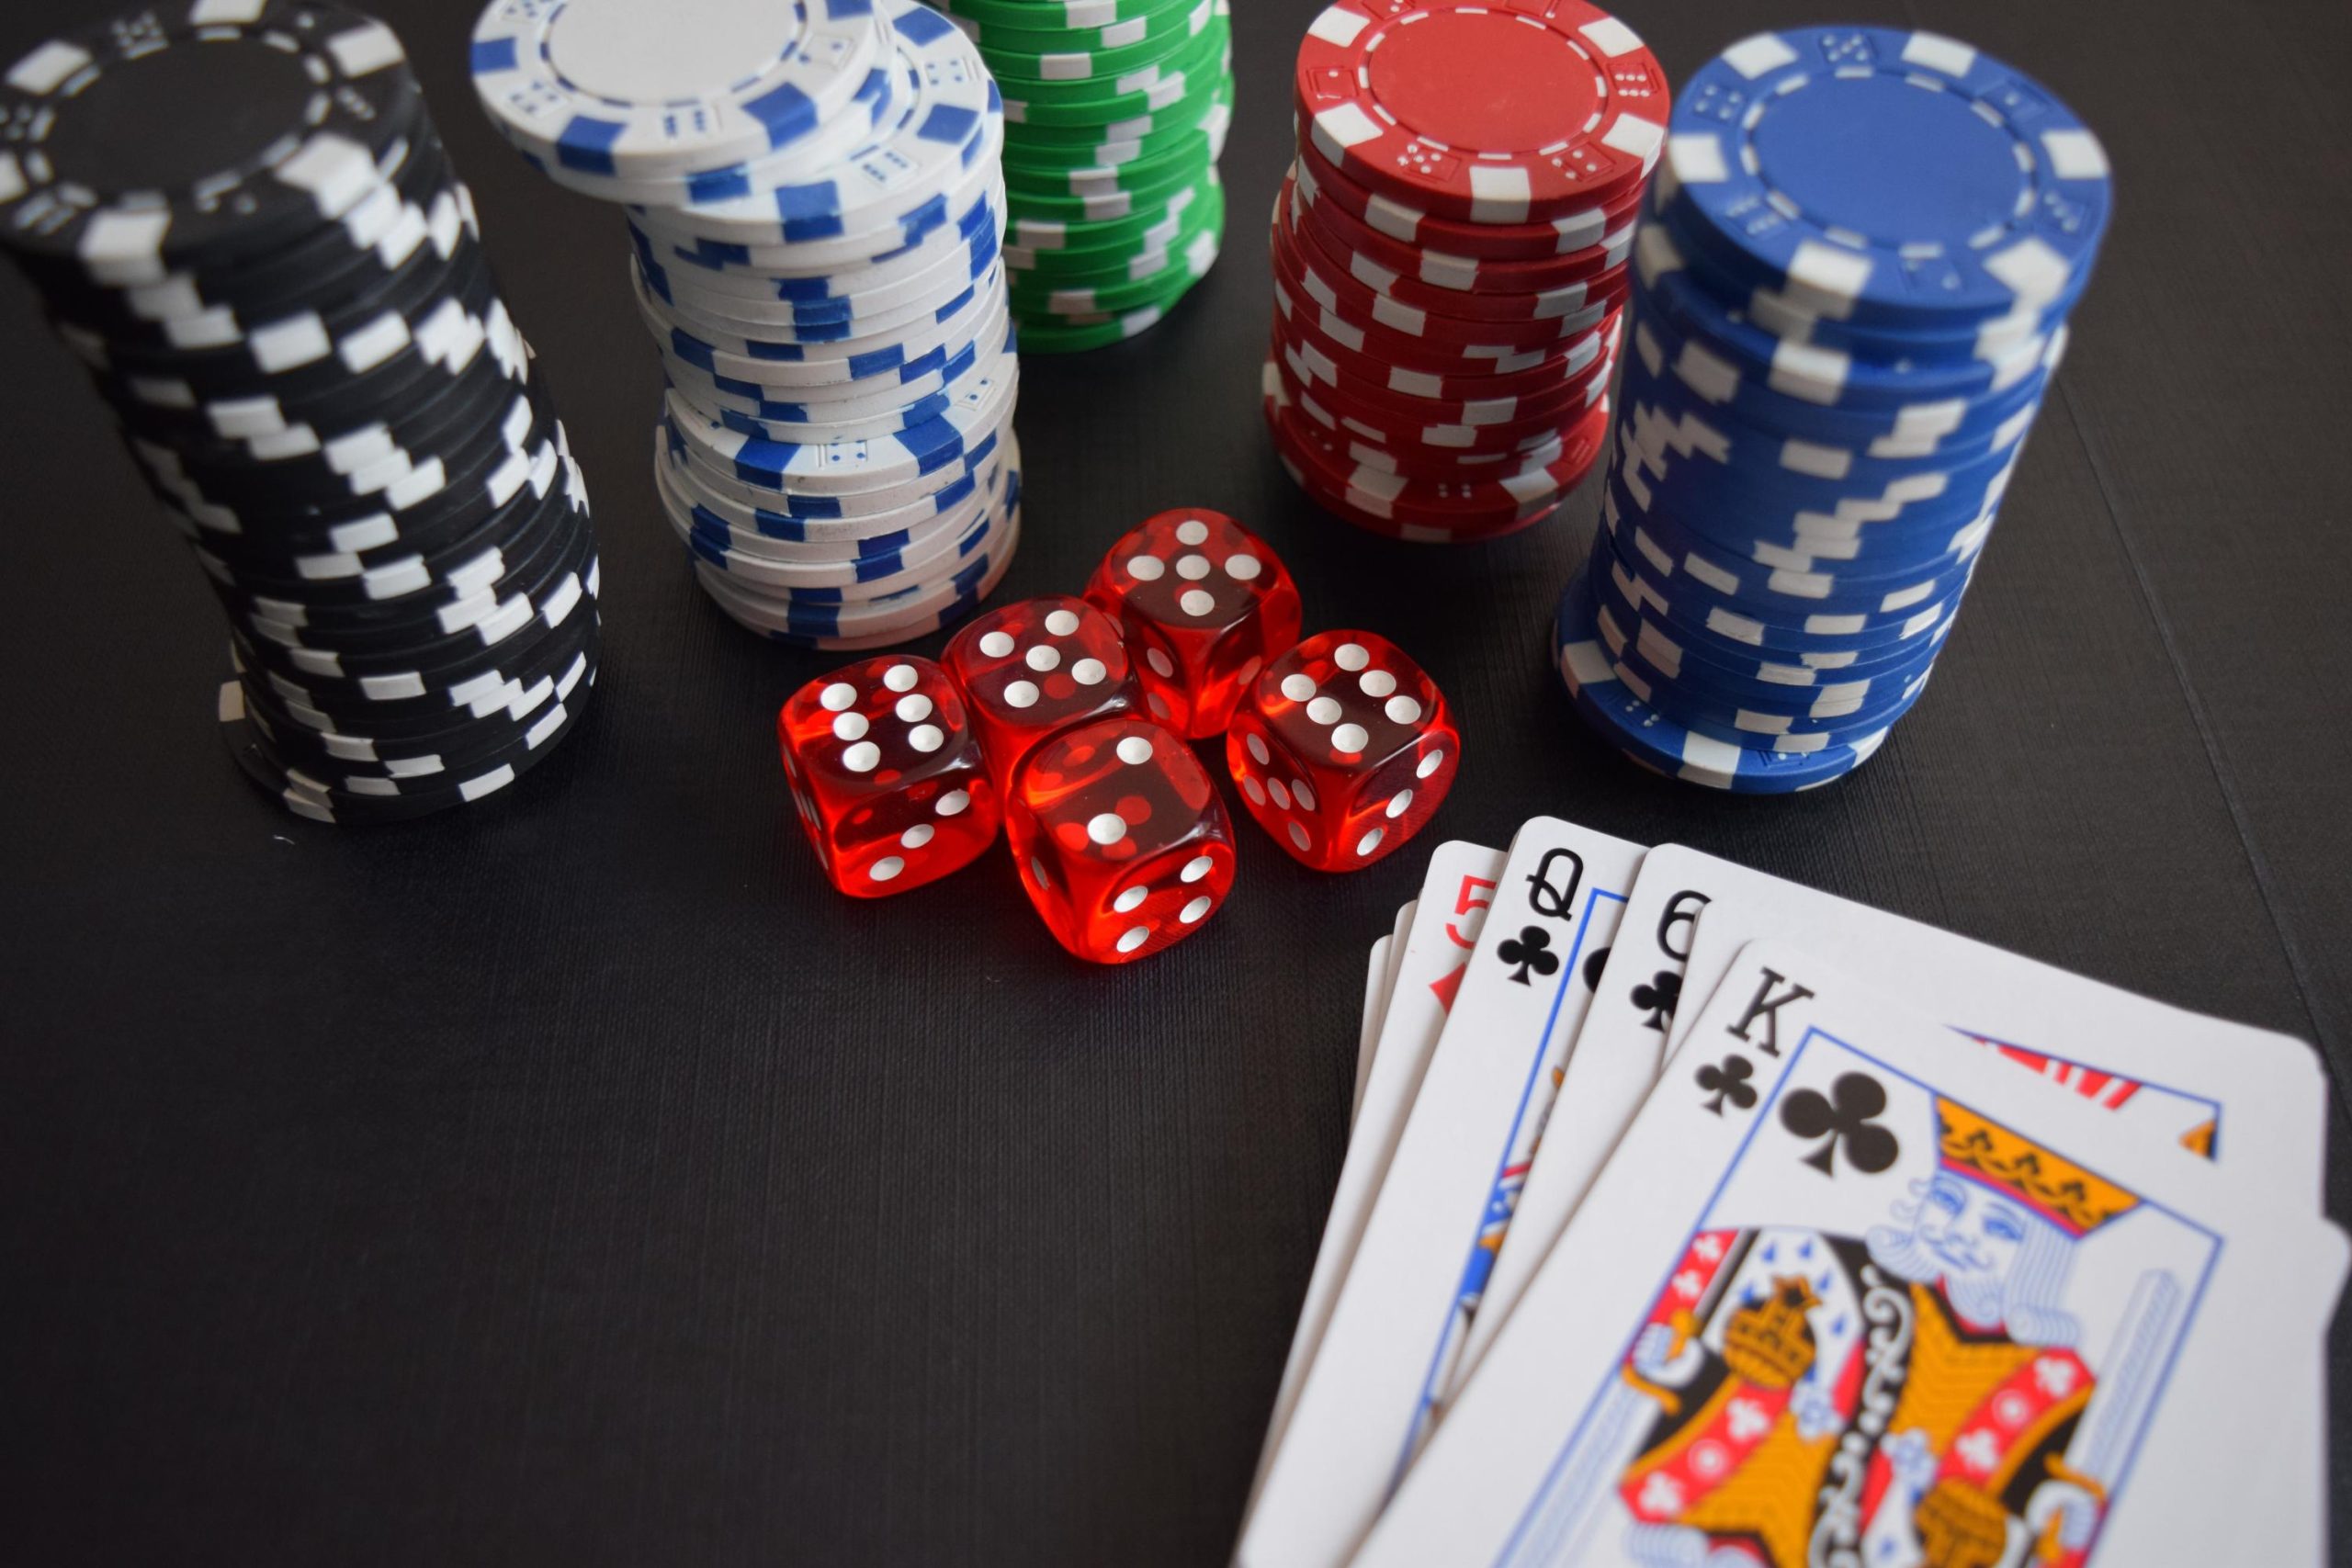 How are casinos leveraging influencer marketing?